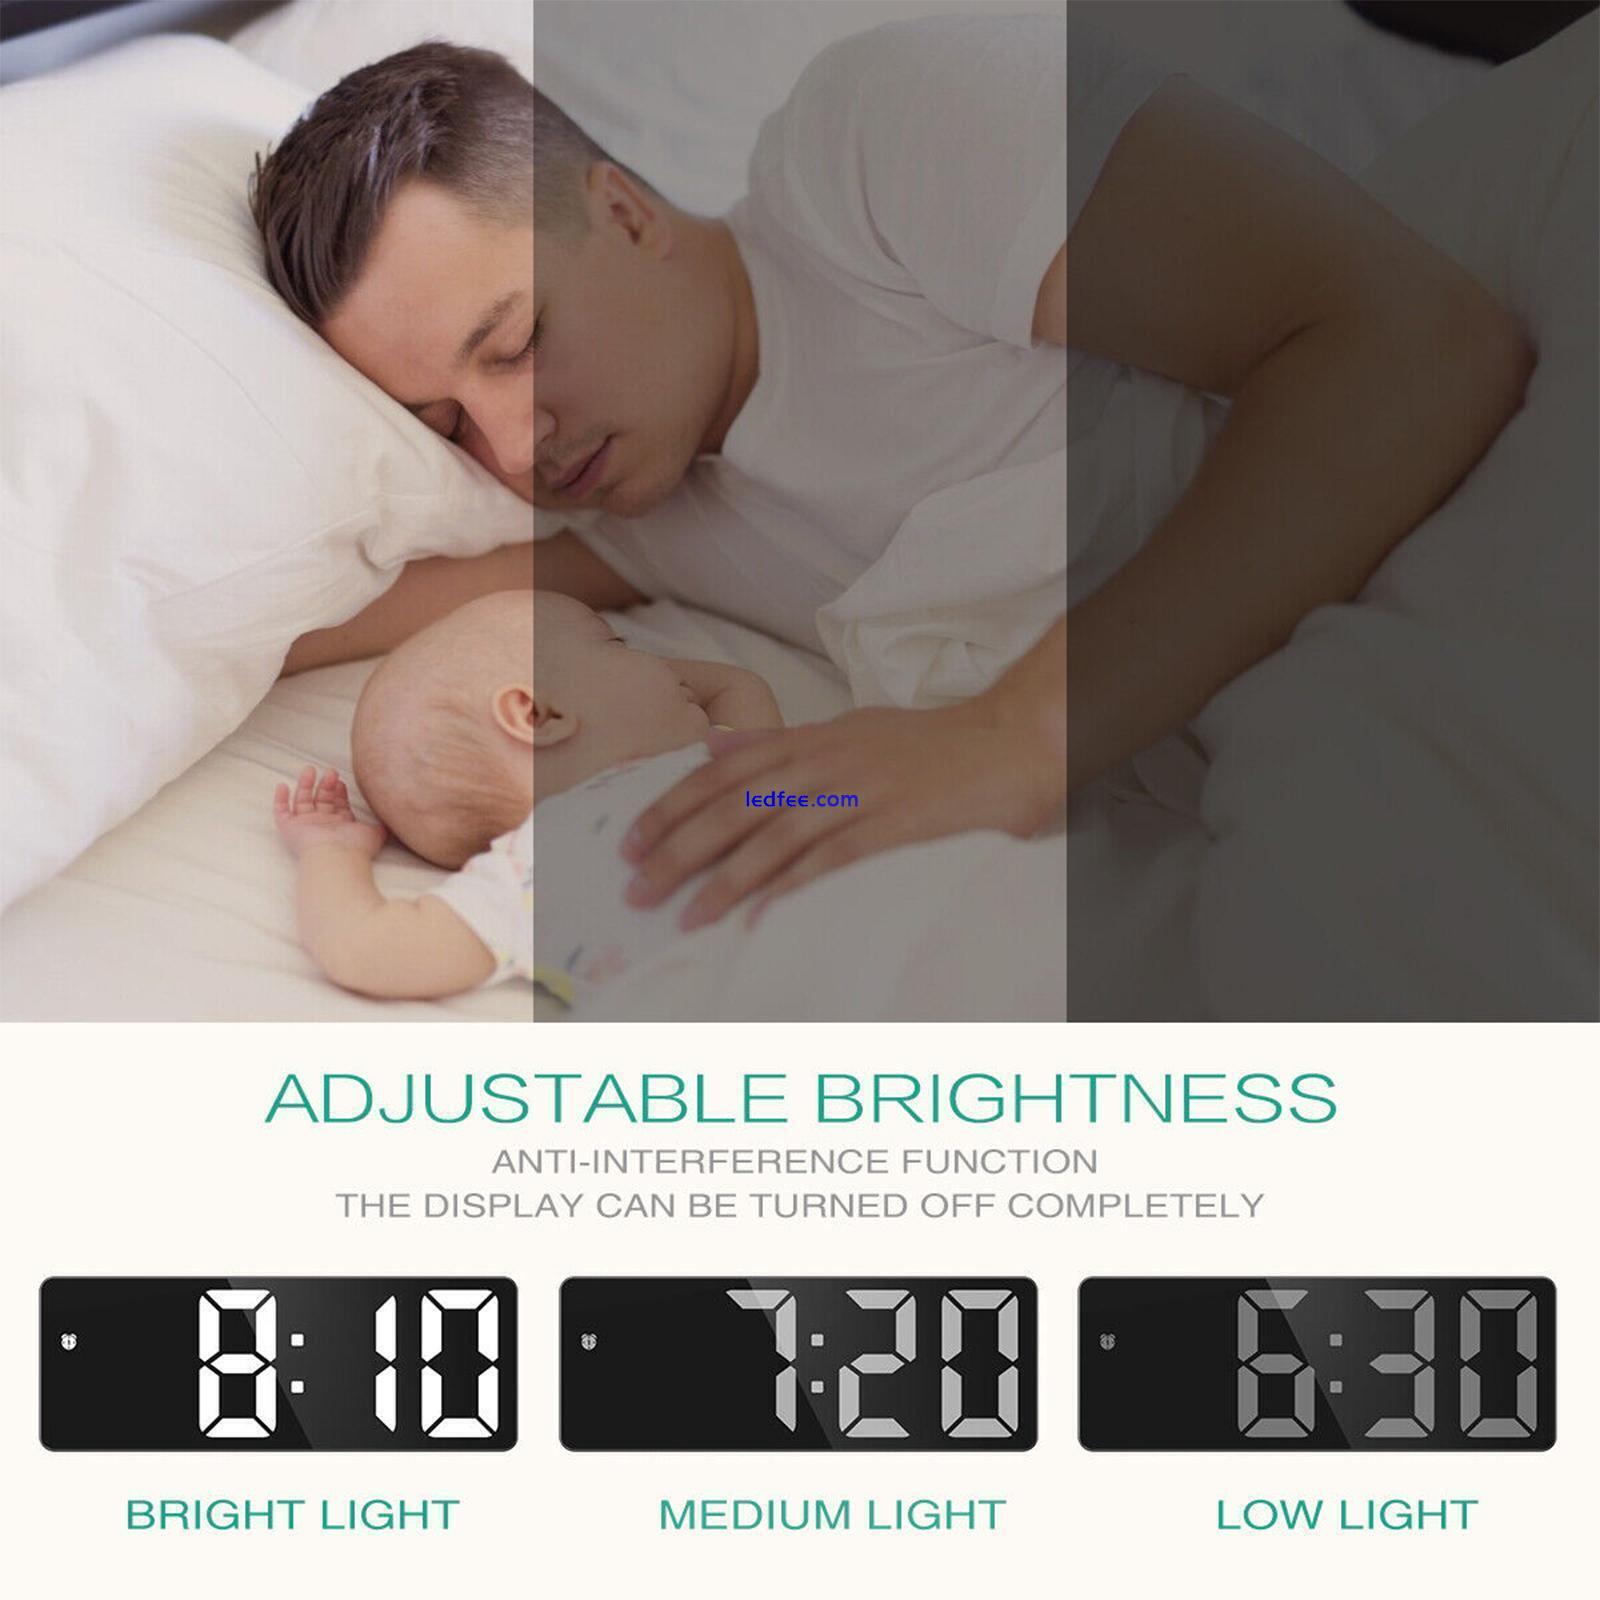 Large LED Mirror Alarm Clock with USB Temperature Display and Snooze σ: 5 